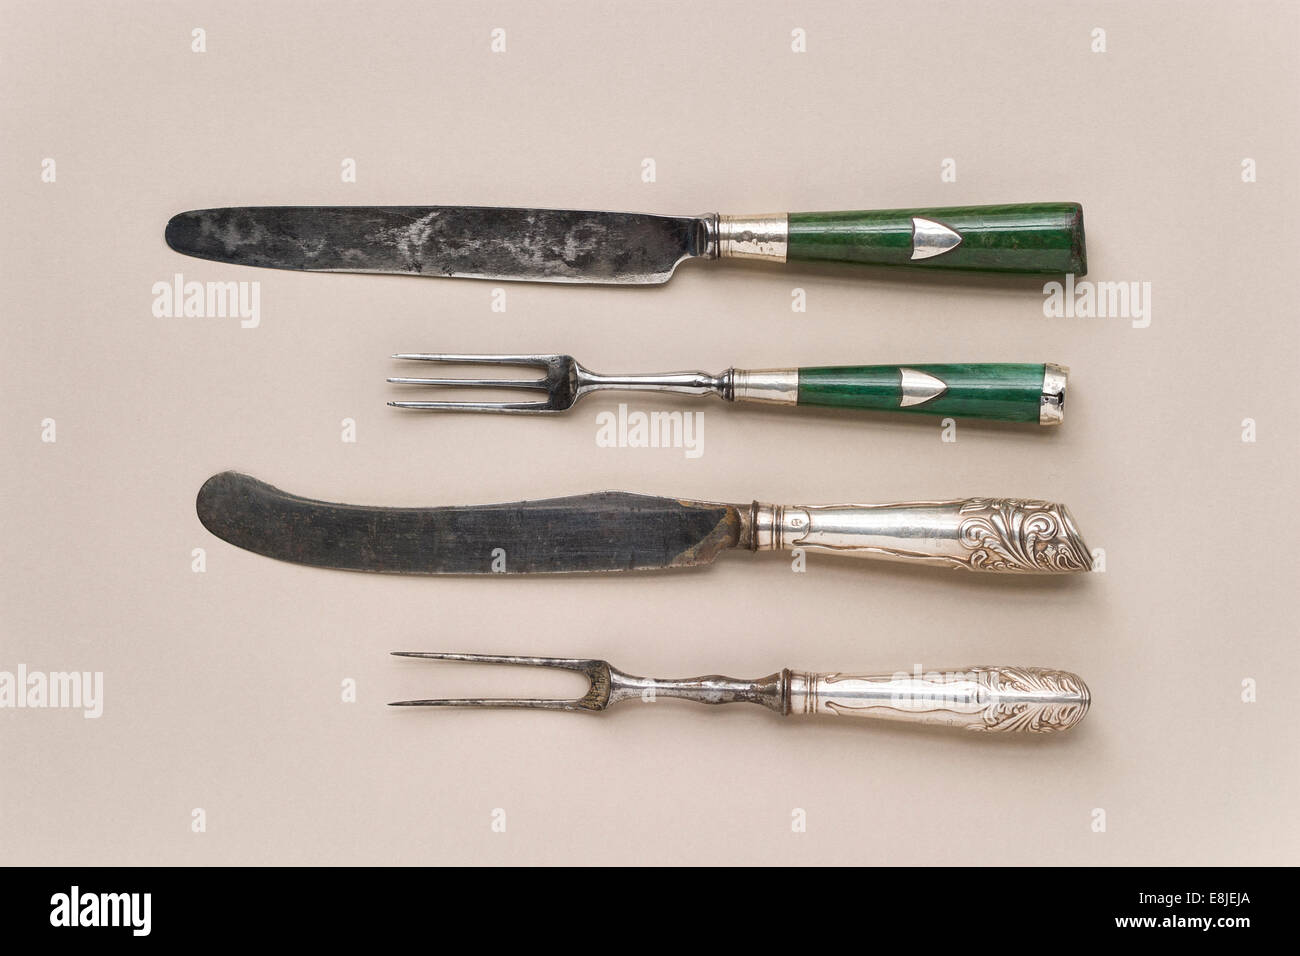 Eighteenth century English cutlery, one set with silver handles the other with green stained ivory handles. Stock Photo